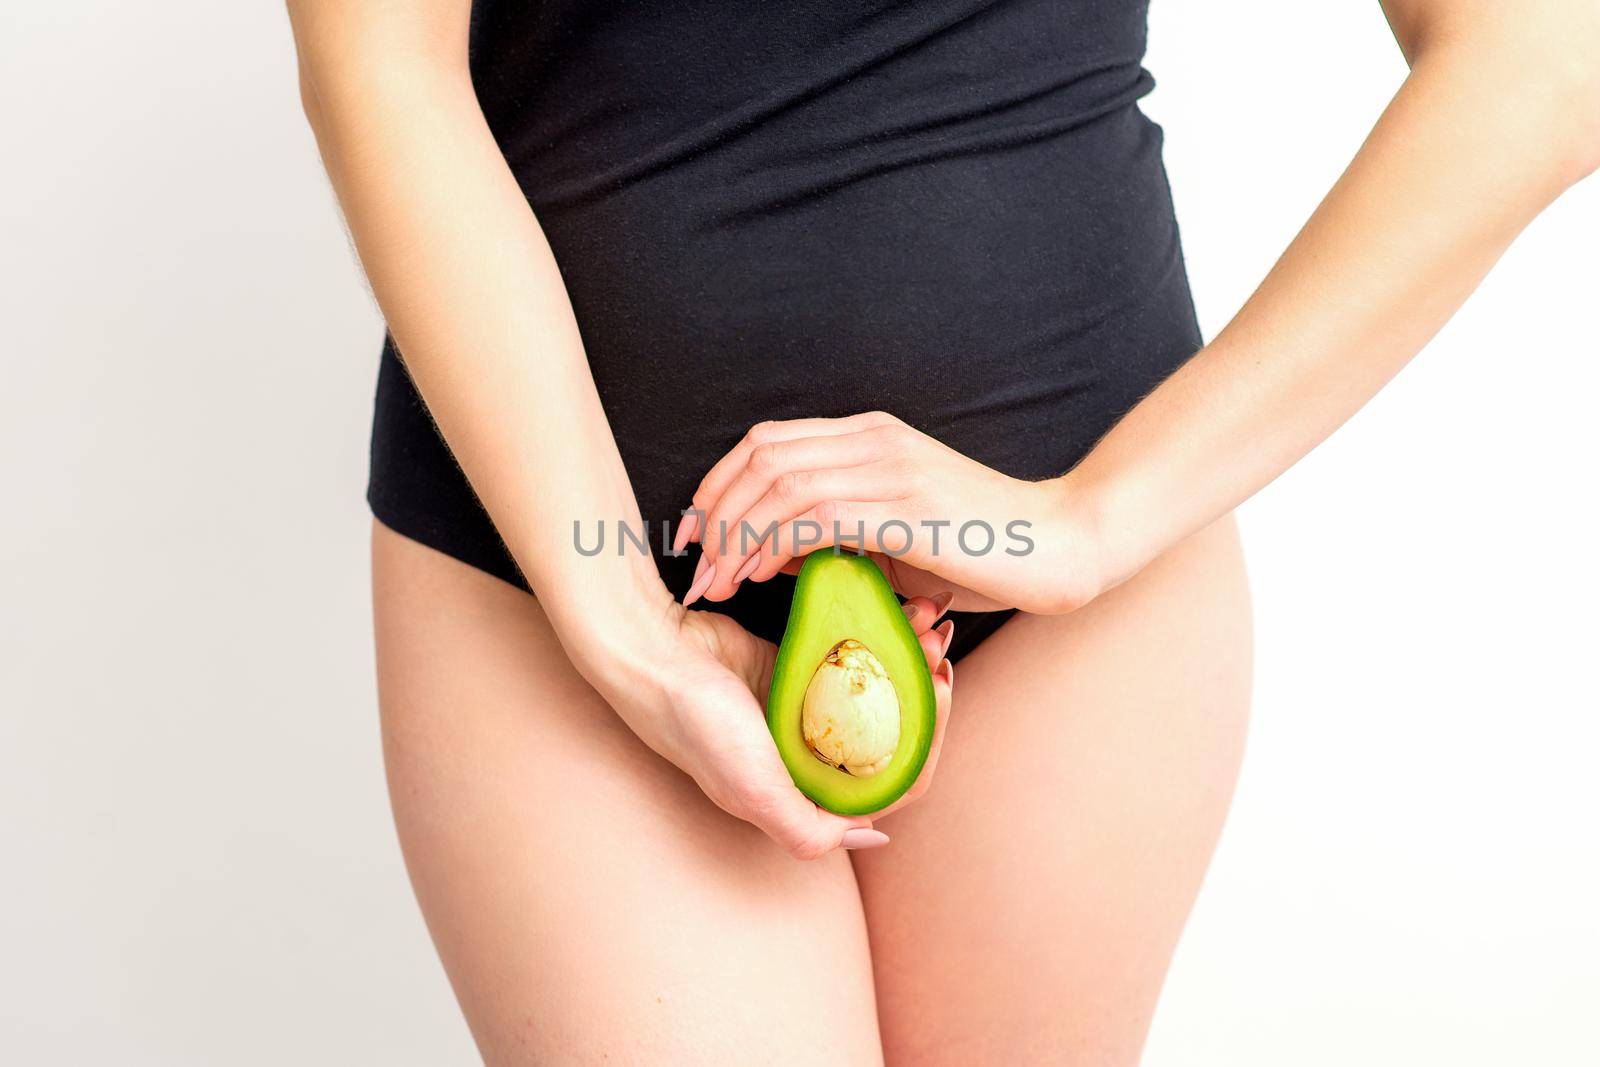 Healthy nutrition and pregnancy concept. Young woman holding one half of an avocado fruit close to her belly over a white background. by okskukuruza